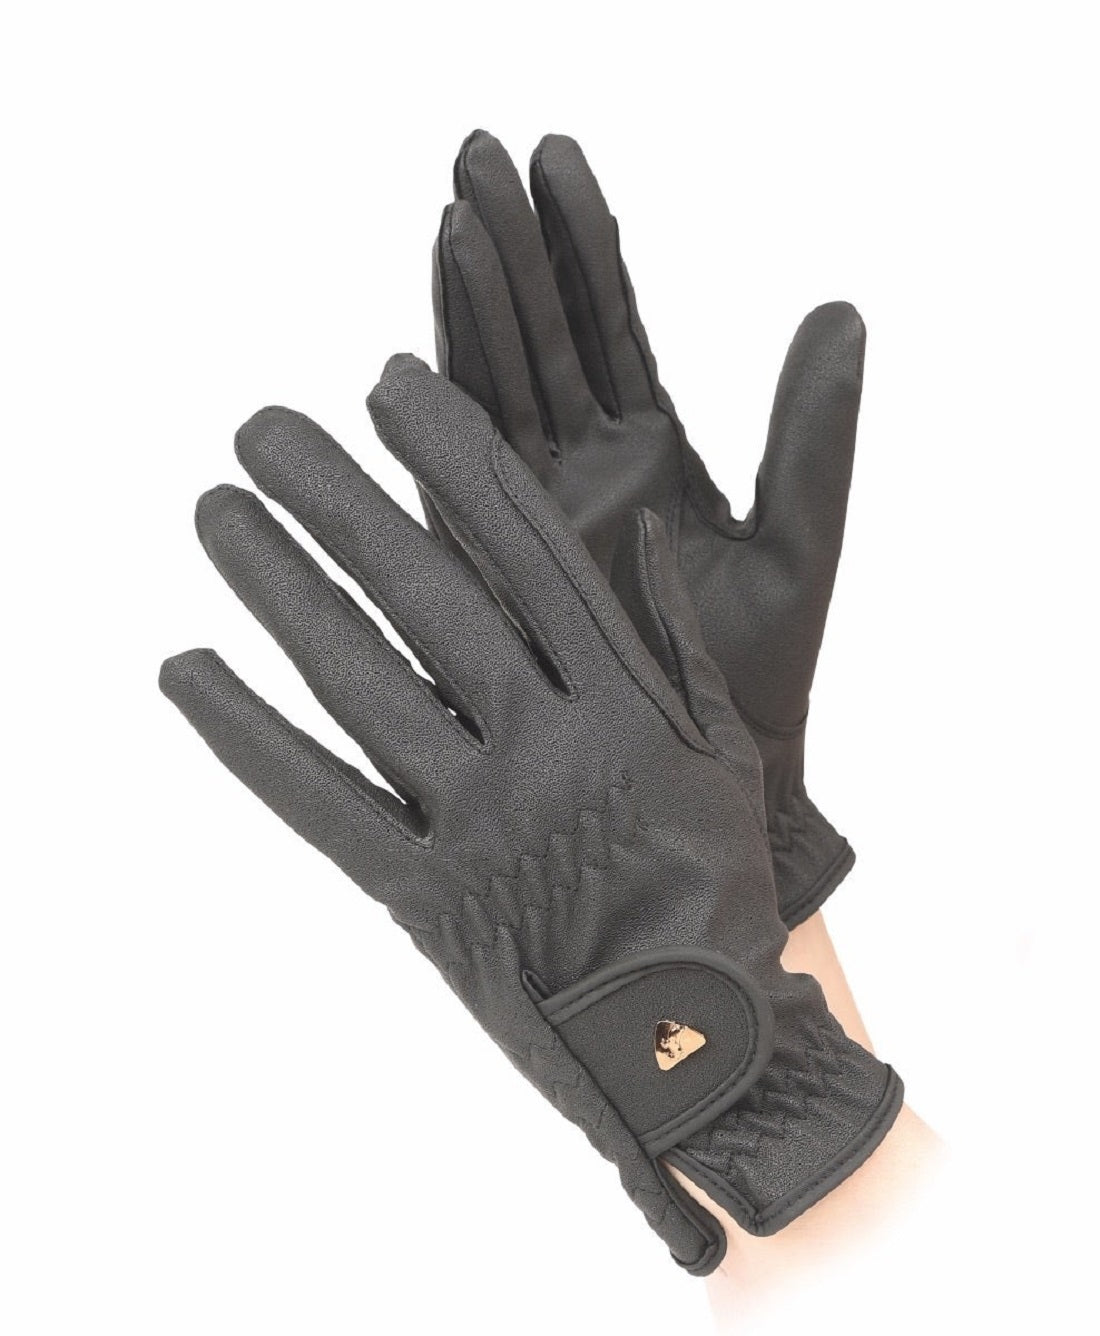 Shires Aubrion PU Riding Work Horse Riding Non-Slip Synthetic Leather Gloves